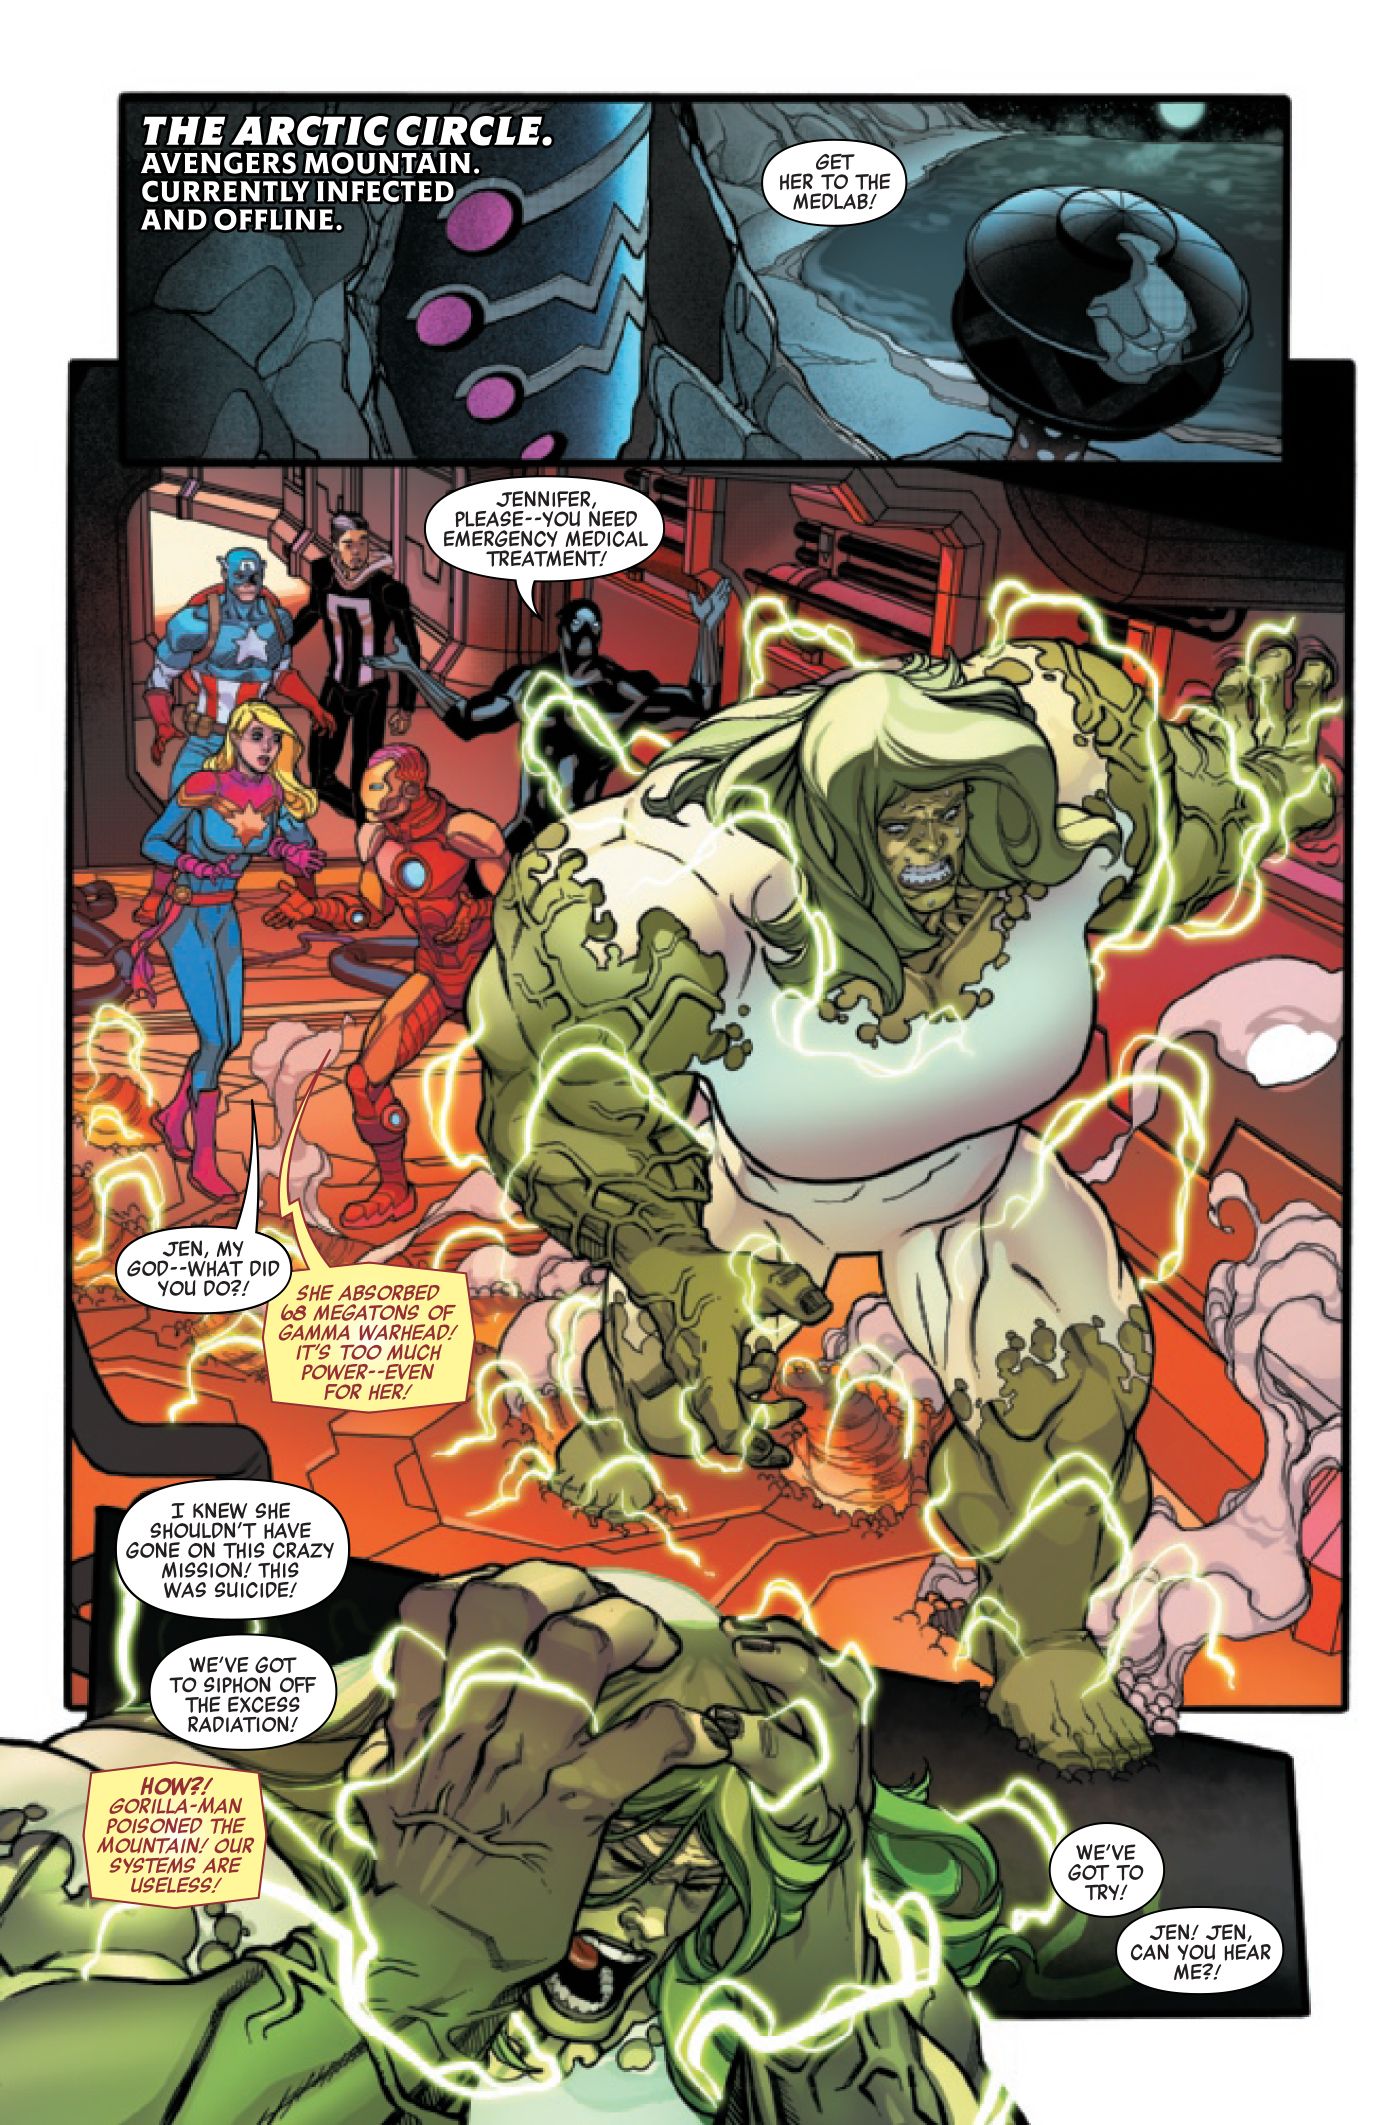 She-Hulk looks ready to explode from absorbing too much gamma radiation.